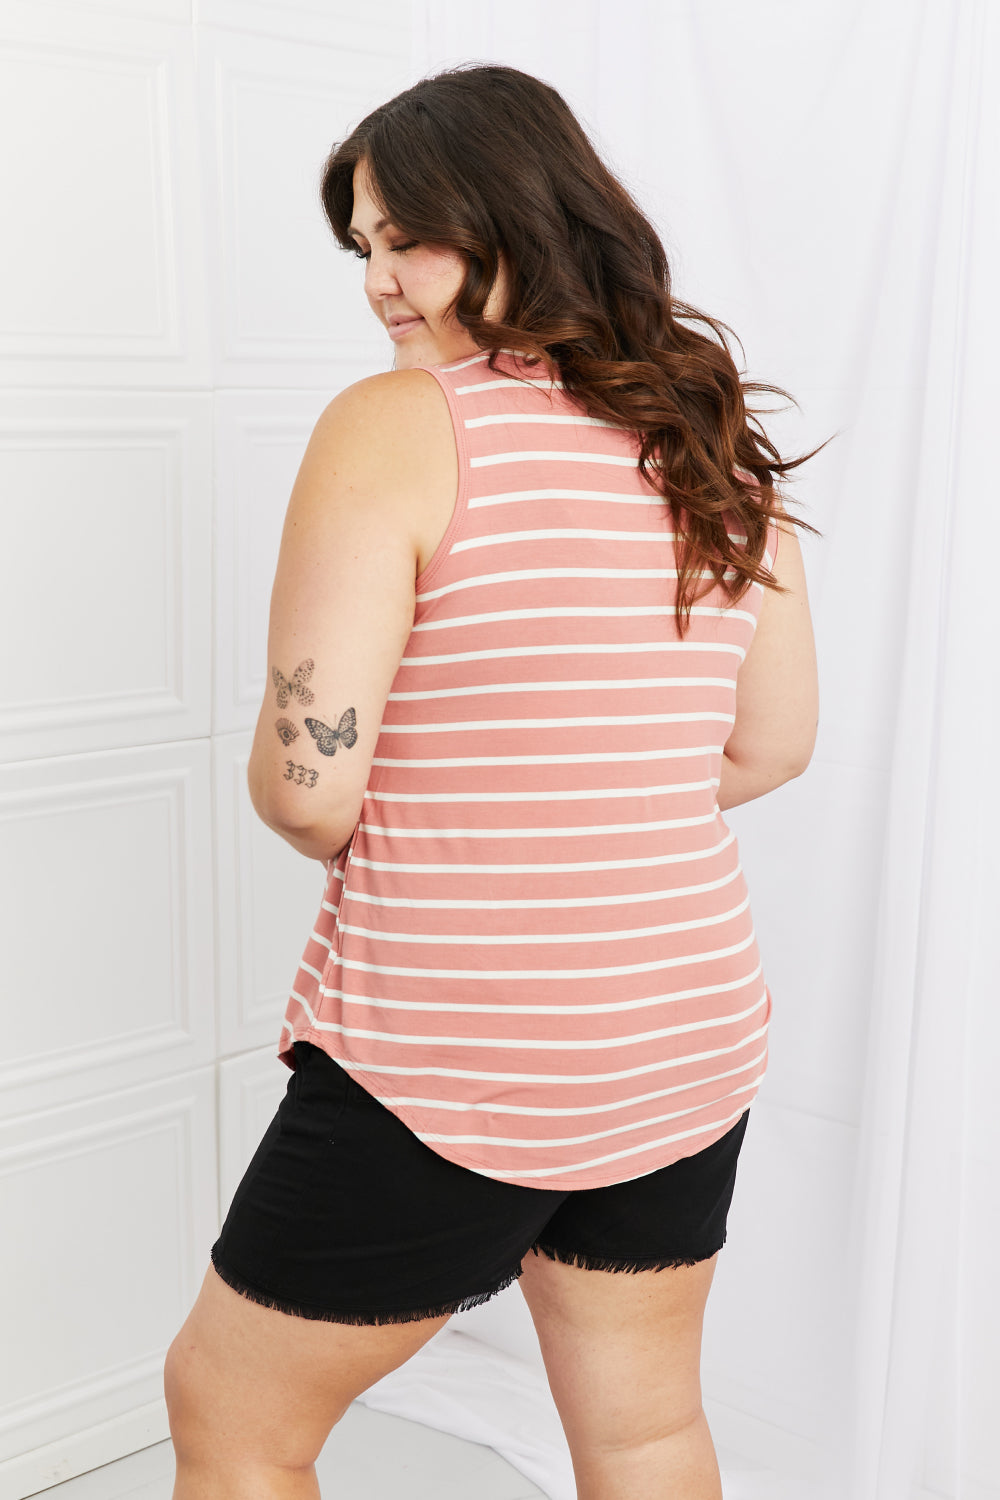 Find Your Path Full Size Sleeveless Striped Top - Women’s Clothing & Accessories - Shirts & Tops - 2 - 2024